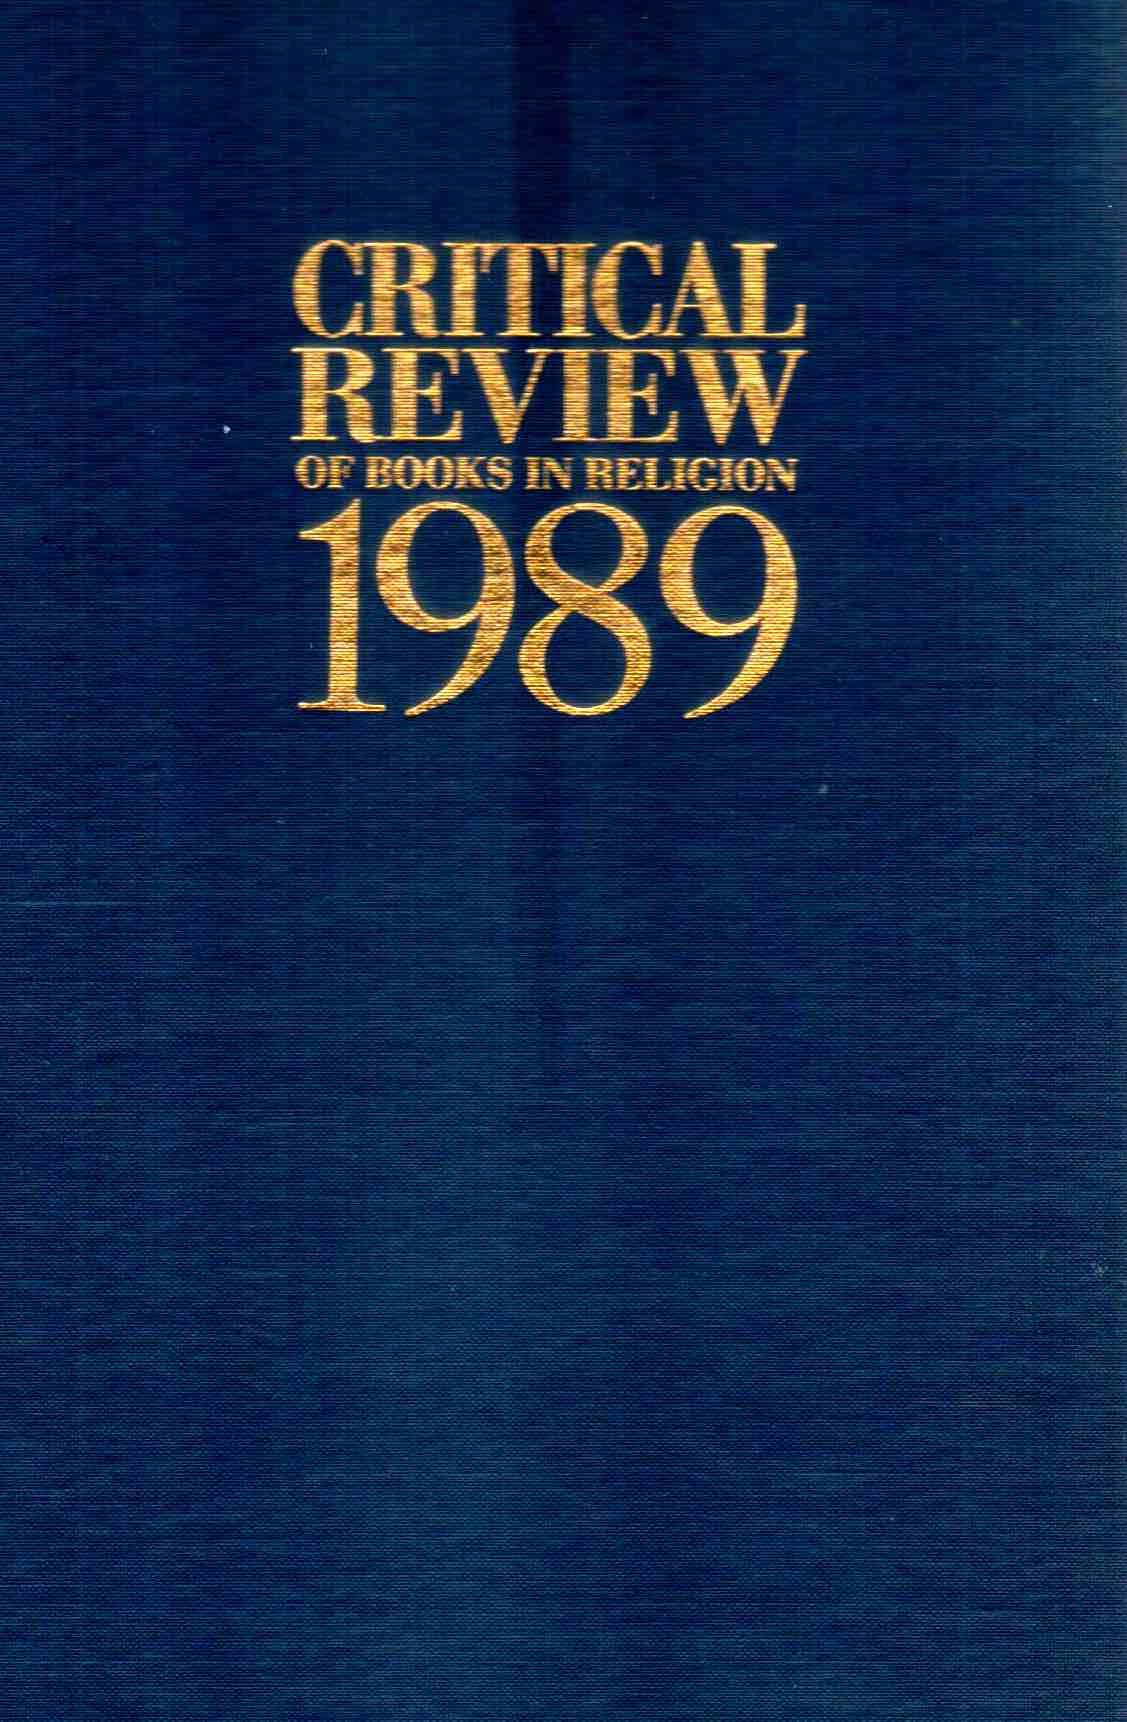 Cover of Critical Review of Books in Religion 1989